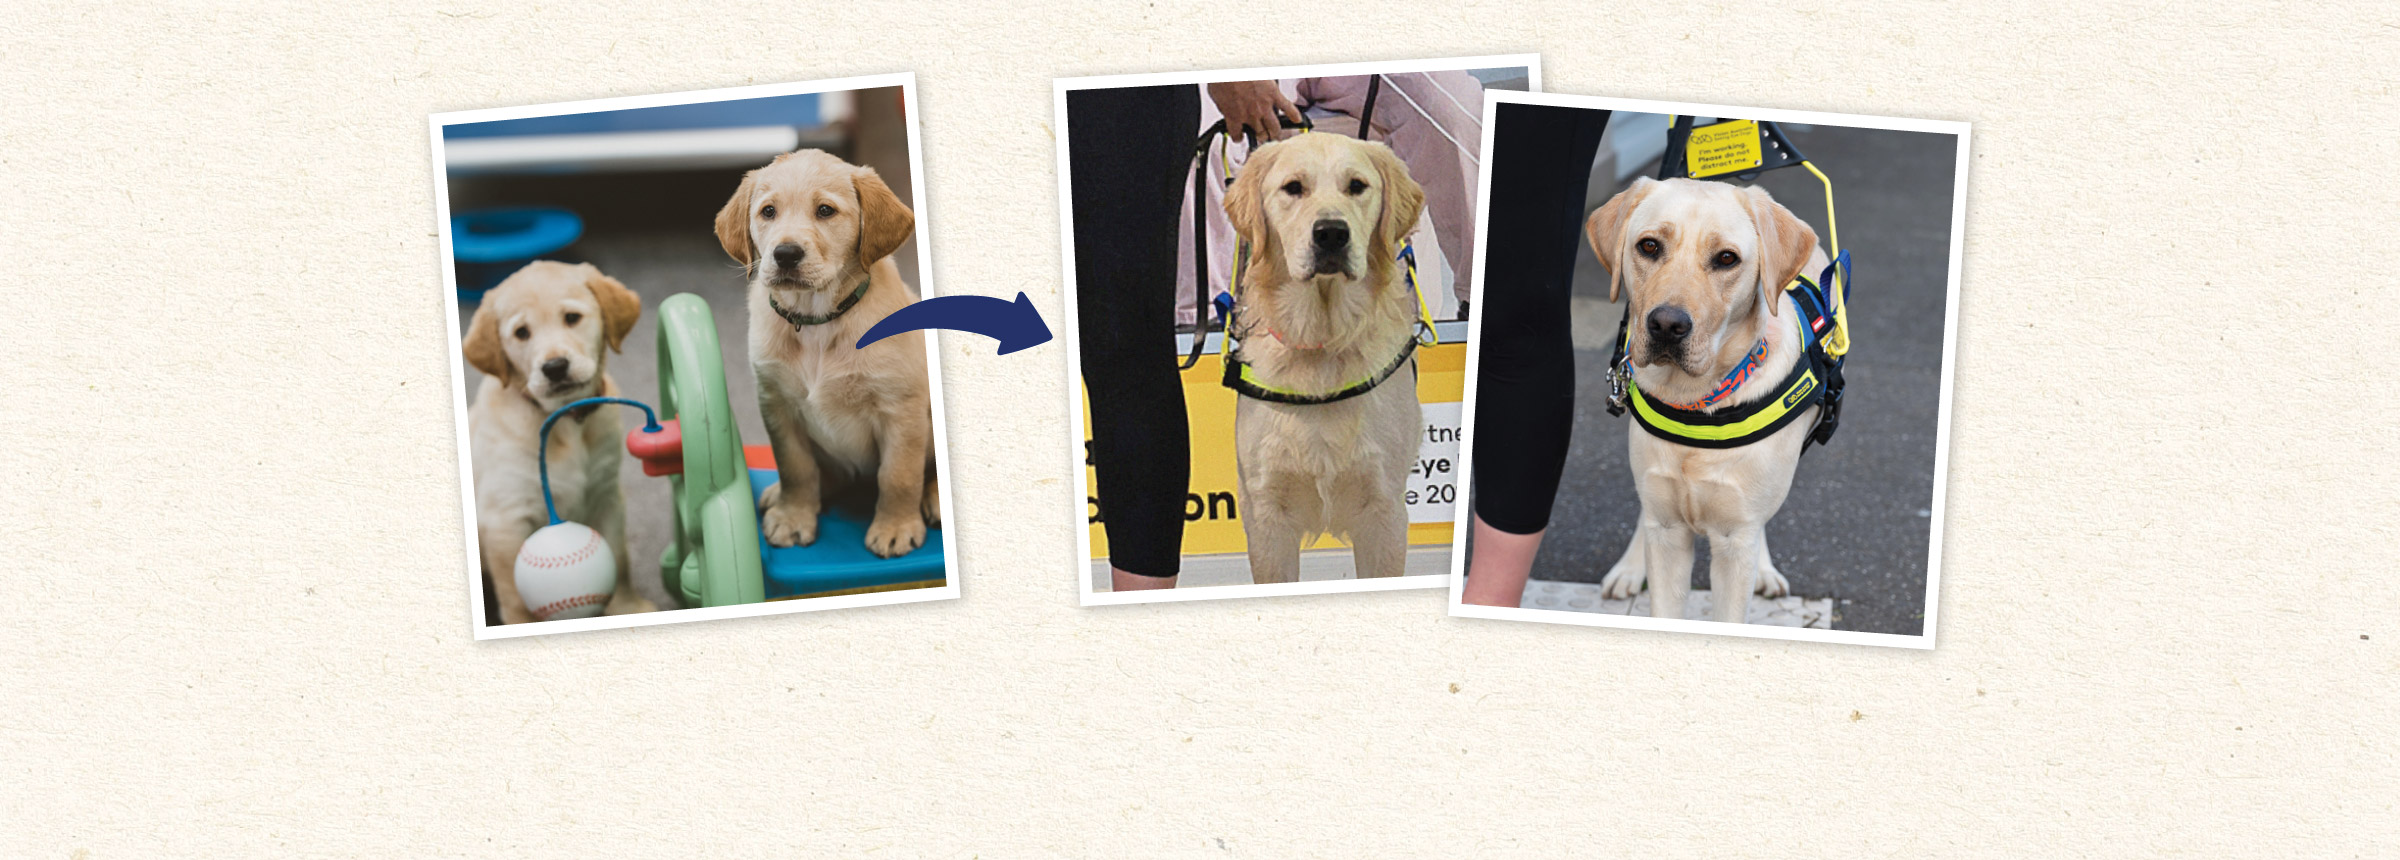 Three photos side by side. The one on the left shows two yellow Labrador puppies. An arrow pointing to the right indicates the other two photos are of them grown up into Seeing Eye Dogs